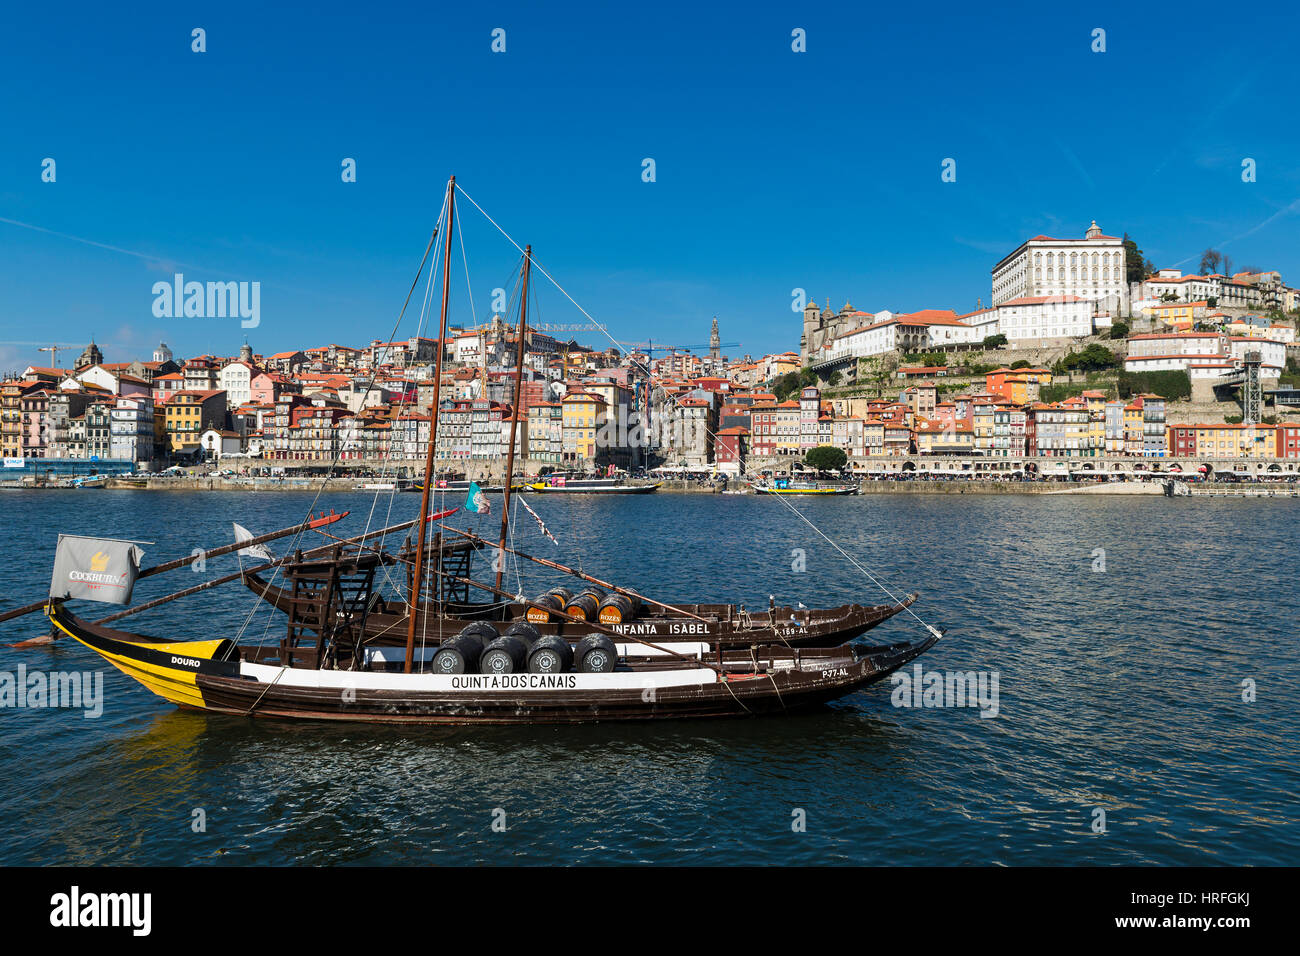 Porto, Portugal - February 25, 2017: Traditional Rabelo Boats ('Barcos Rabelos') in the Douro River with the city of Porto on the background. Stock Photo